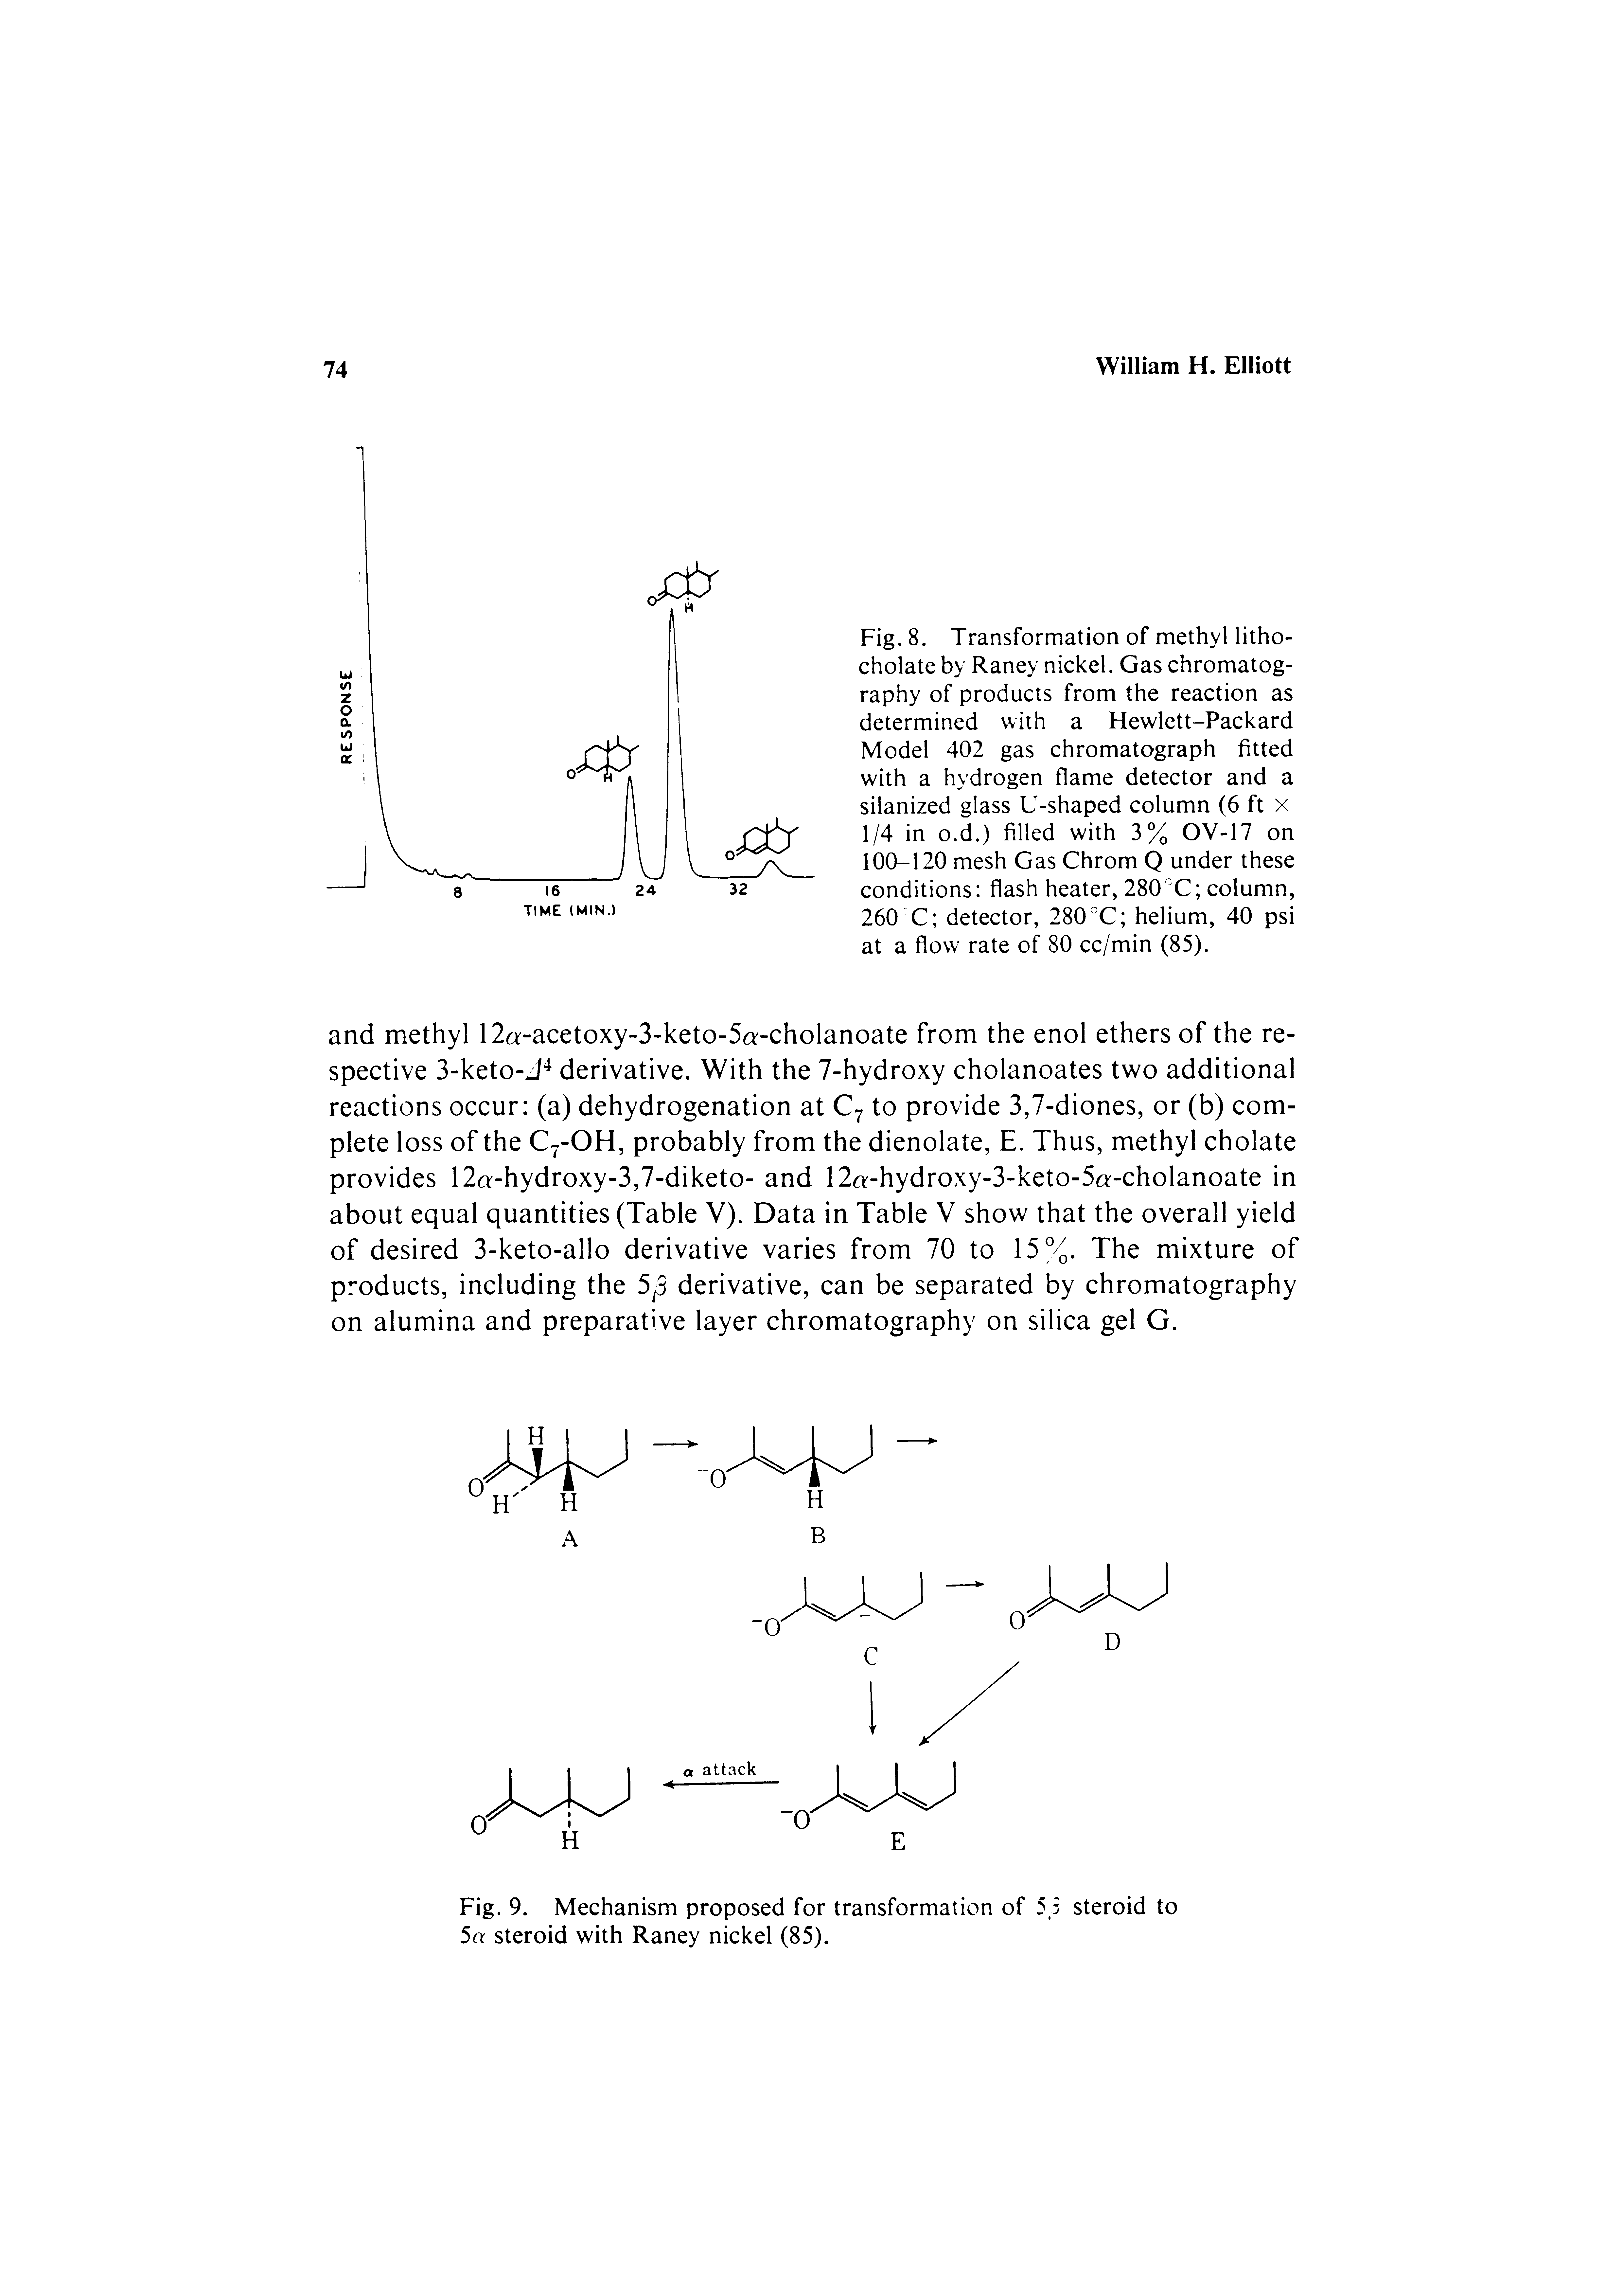 Fig. 8. Transformation of methyl litho-cholate by Raney nickel. Gas chromatography of products from the reaction as determined with a Hewlett-Packard Model 402 gas chromatograph fitted with a hydrogen flame detector and a silanized glass U-shaped column (6 ft x 1/4 in o.d.) filled with 3% OV-17 on 100-120 mesh Gas Chrom Q under these conditions flash heater, 280 C column, 260 C detector, 280°C helium, 40 psi at a flow rate of 80 cc/min (85).